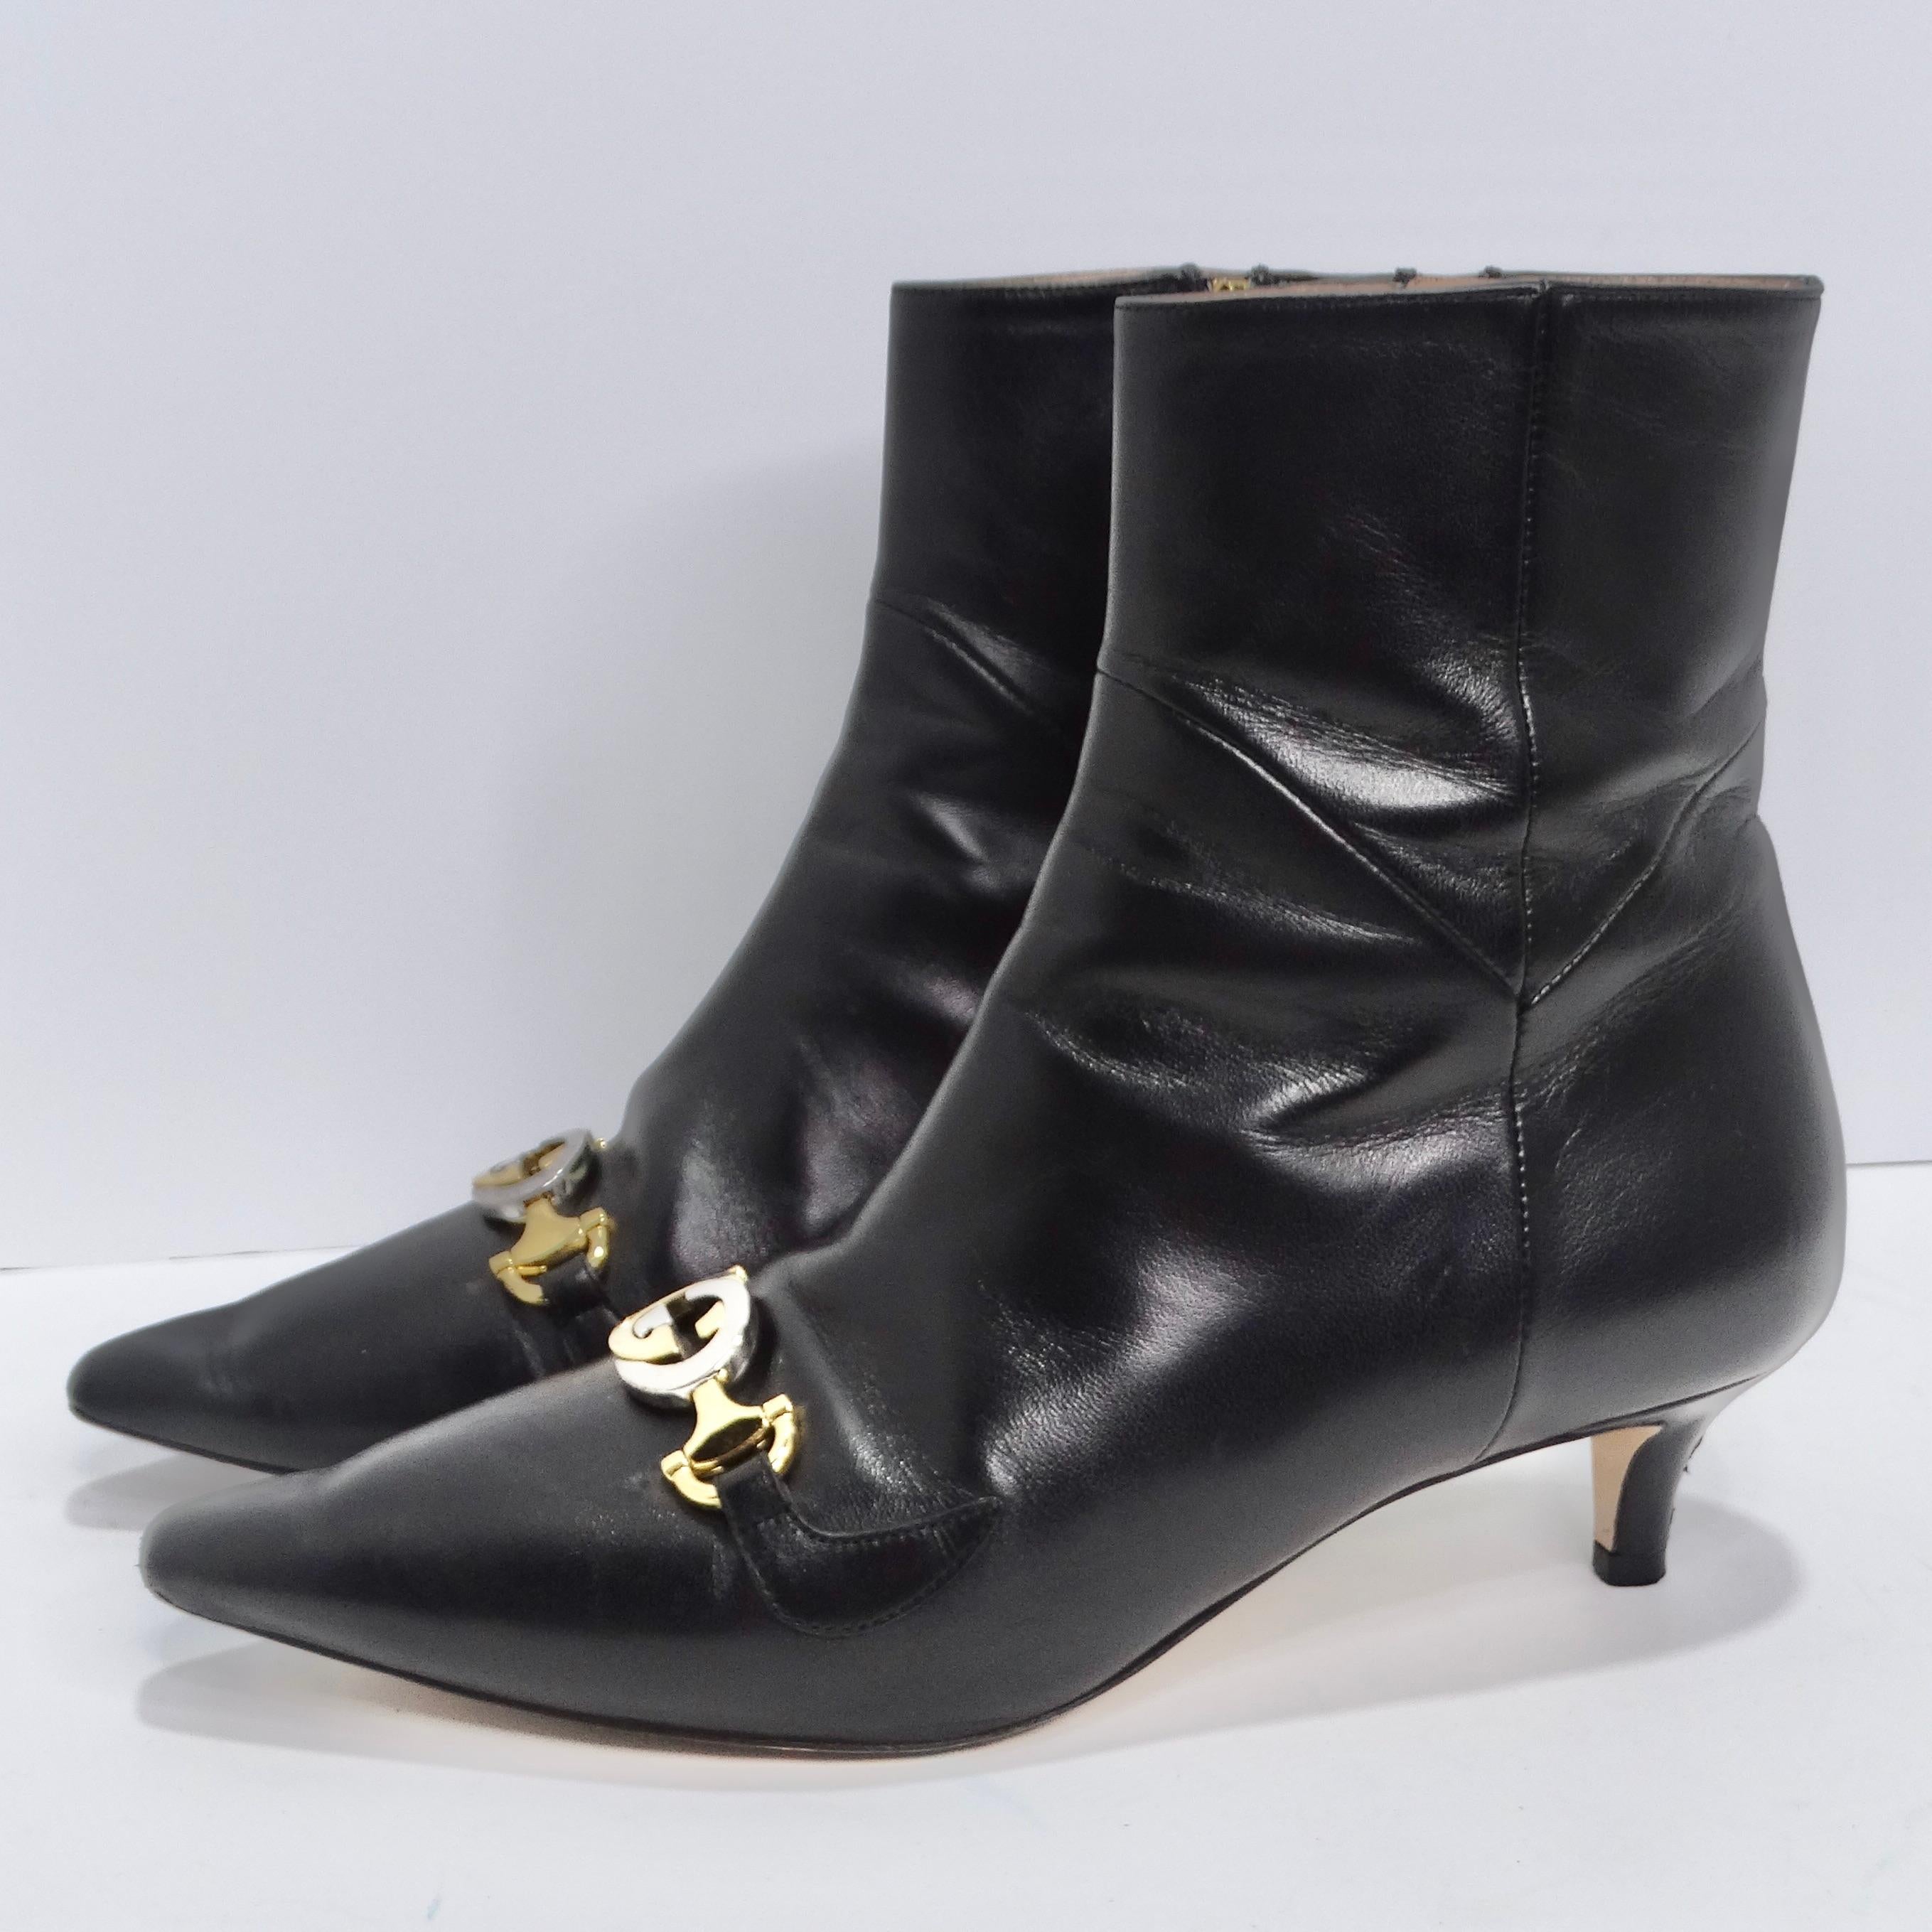 Gucci Leather Zumi Kitten Heel Ankle Boots For Sale 3